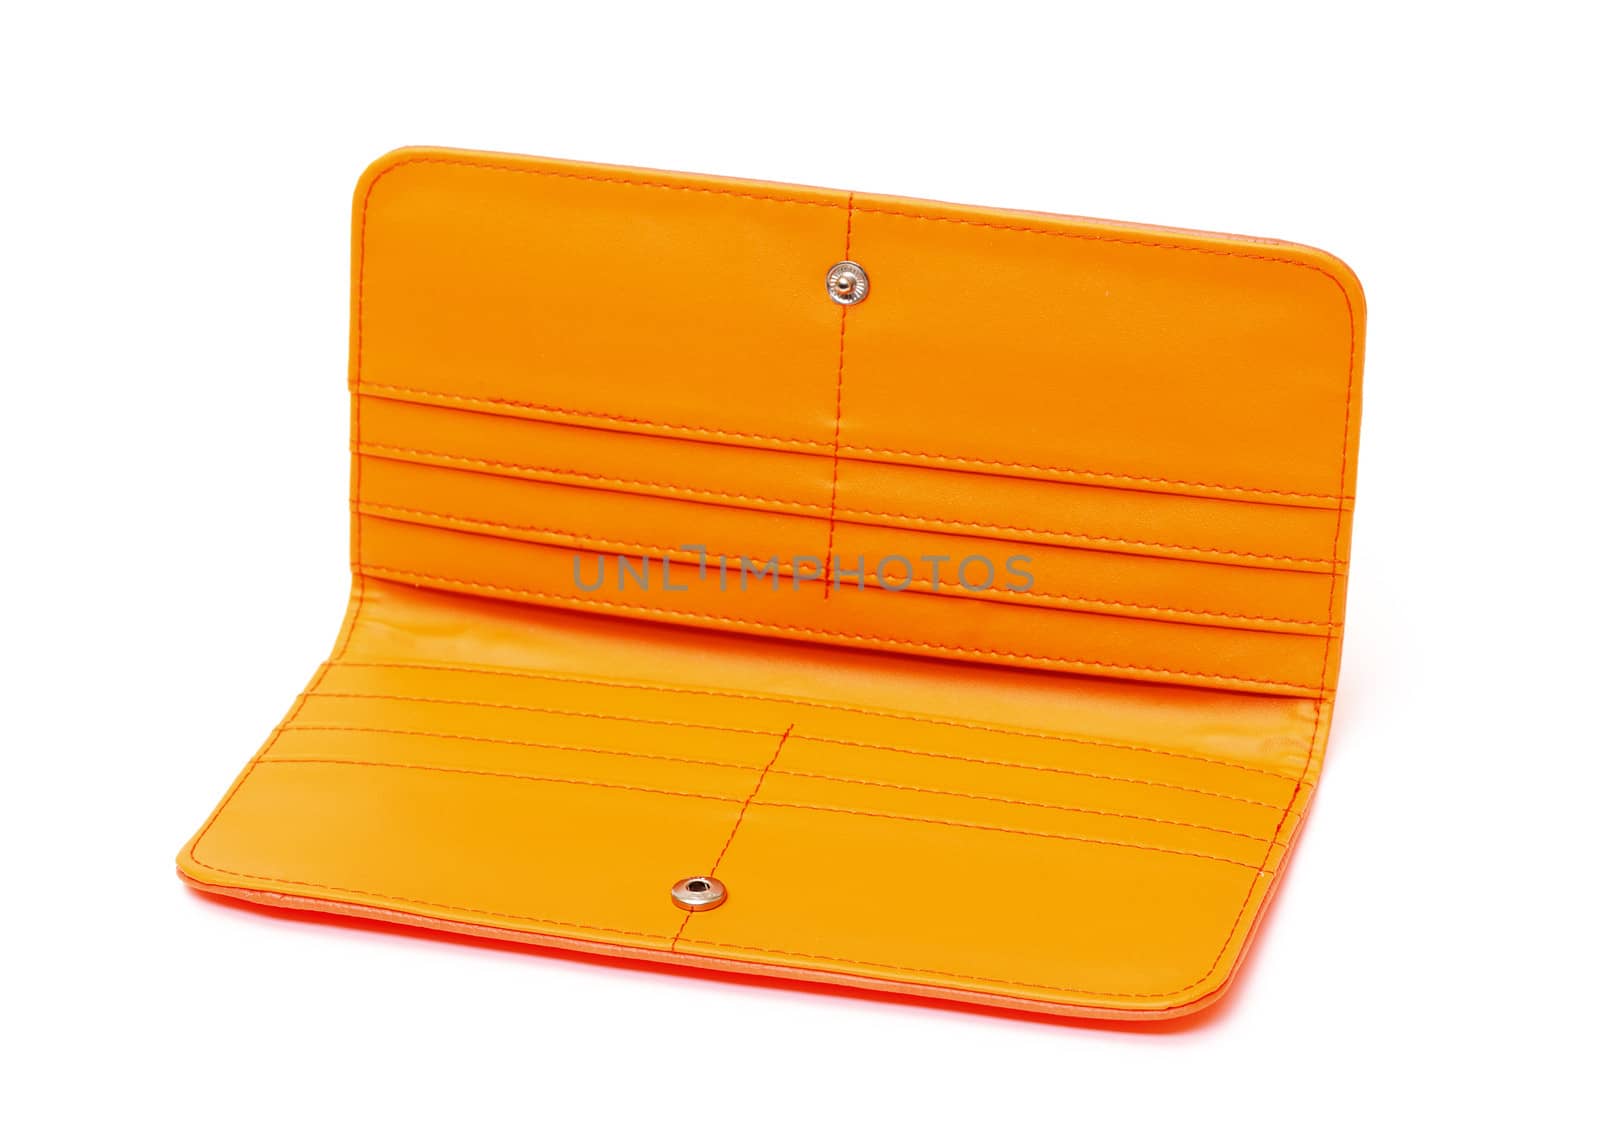 New Orange Leather Wallet by Discovod